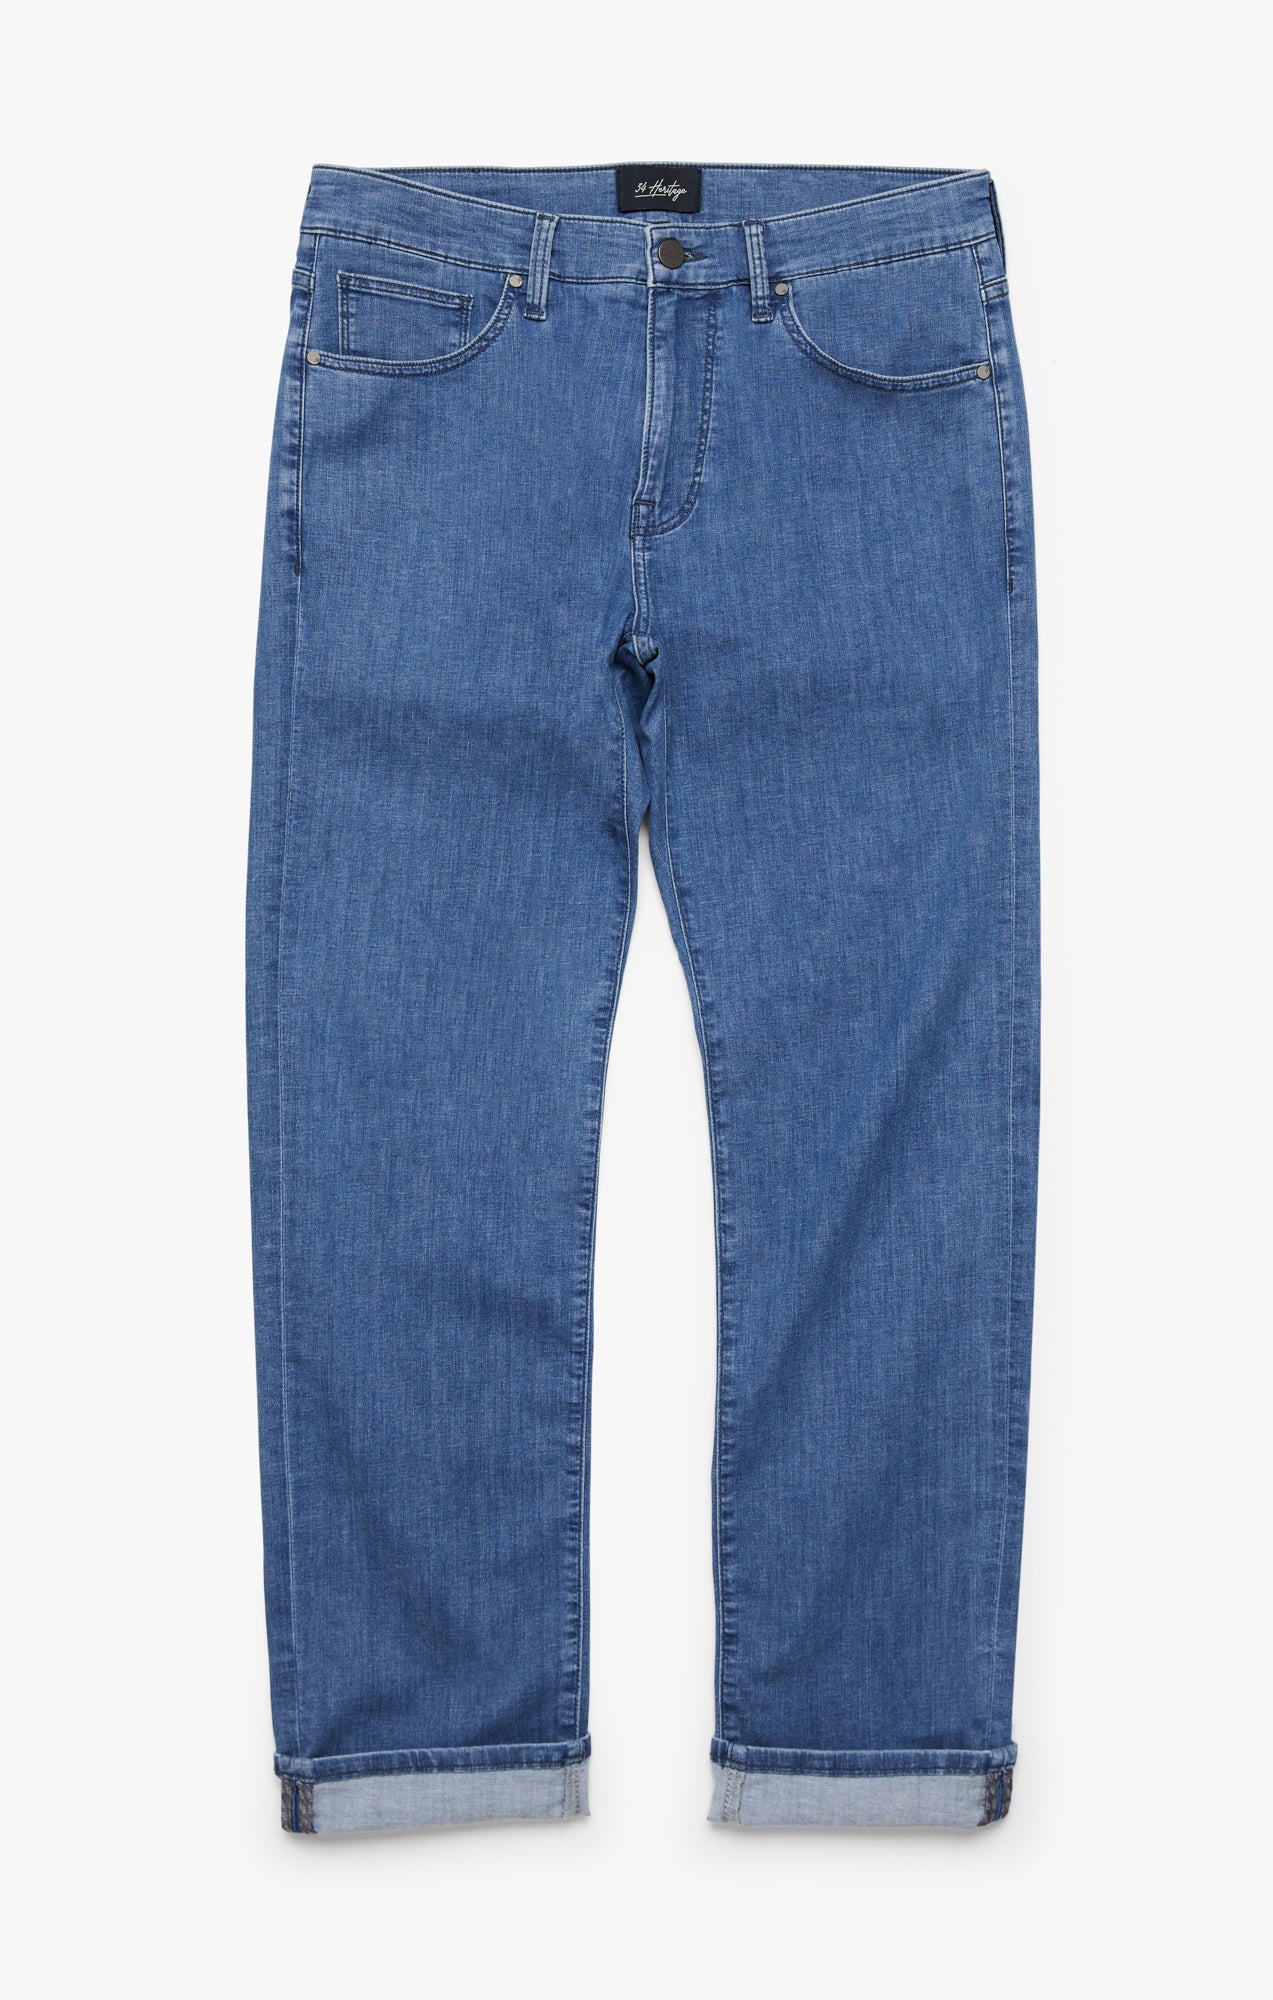 Courage Straight Leg Jeans In Light Shaded Kona